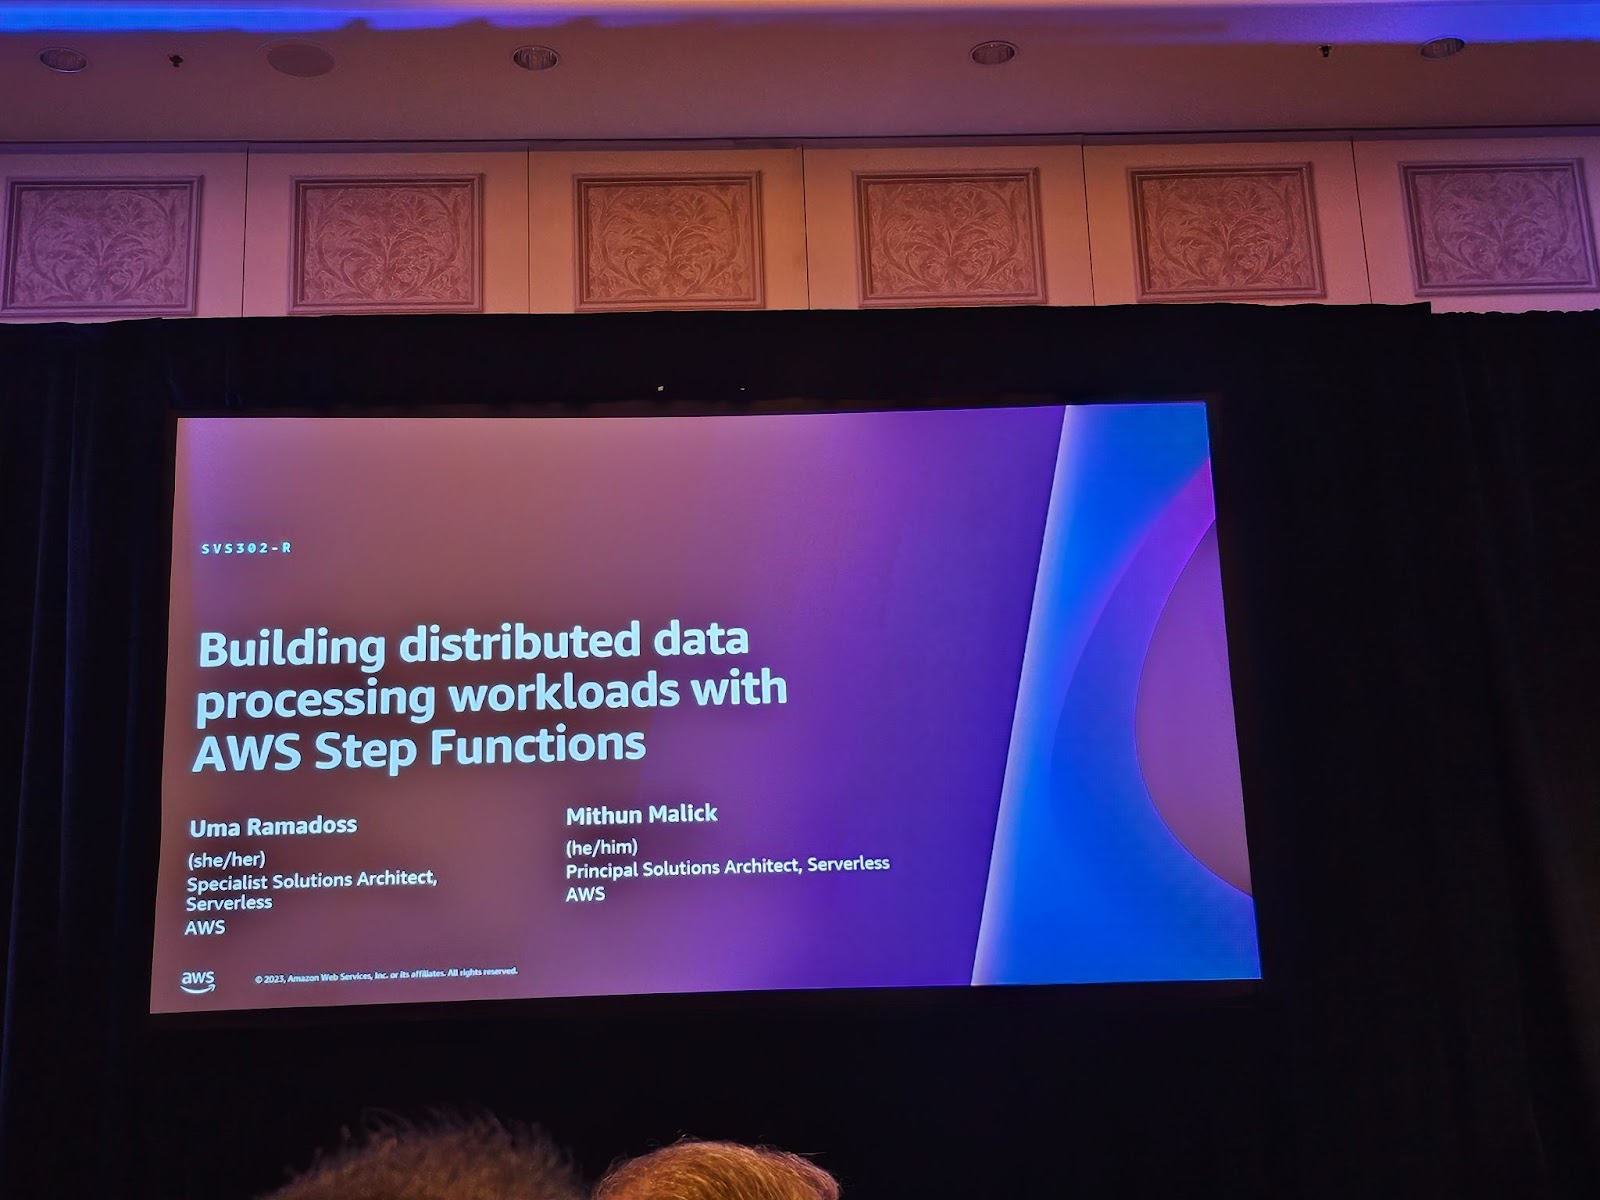 Building distributed data processing workloads with AWS Step Functions